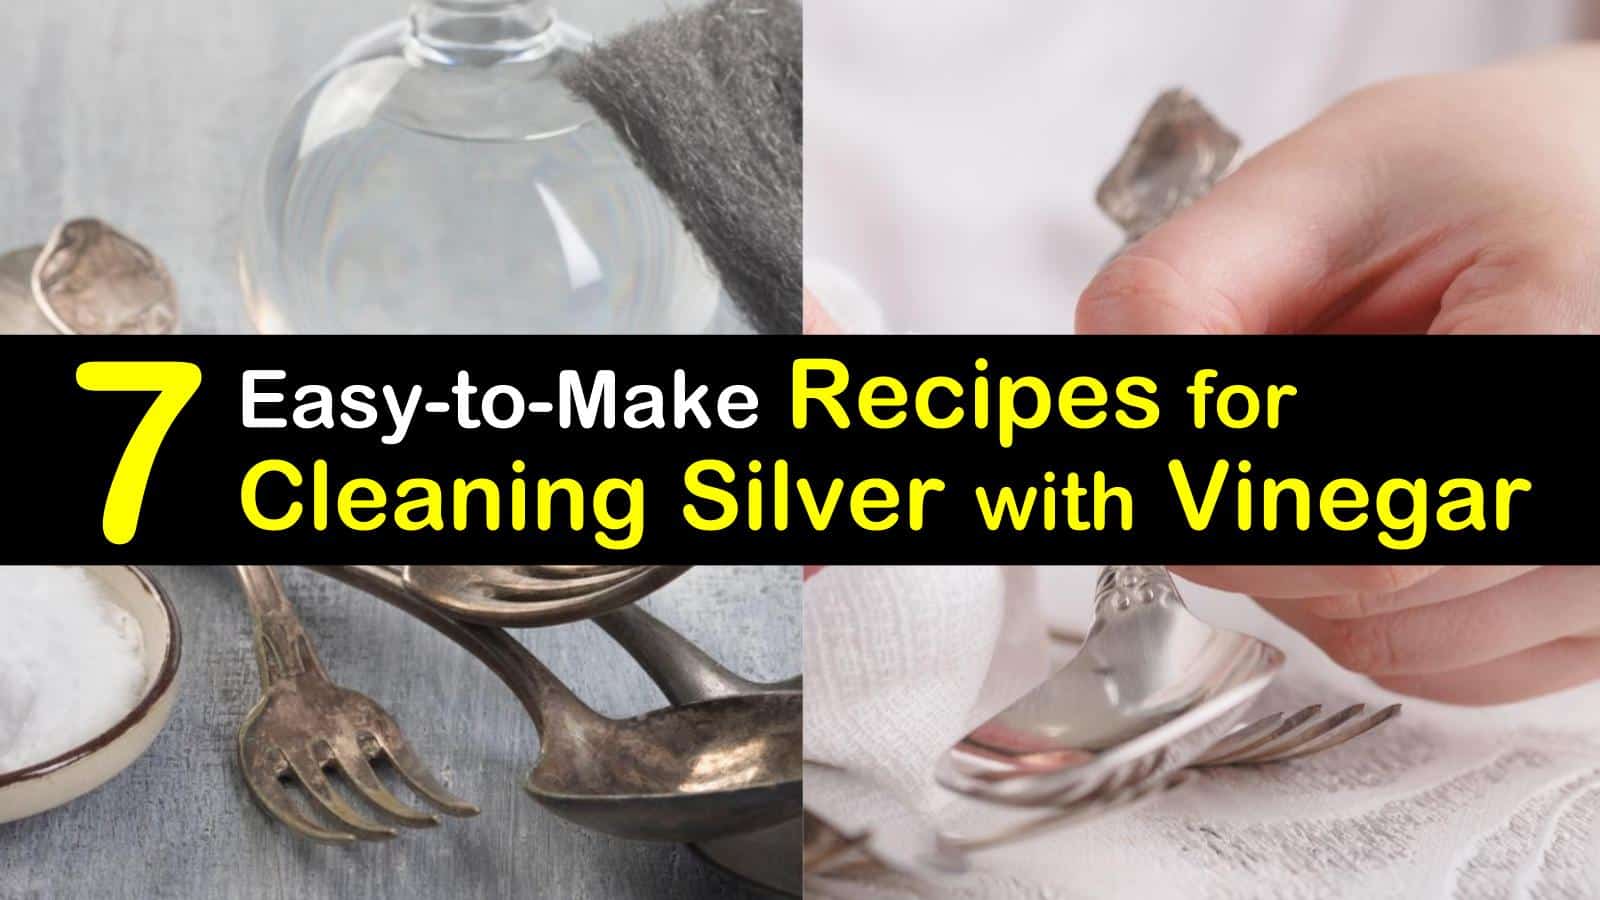 29 Easy-to-Make Recipes to Clean Silver with Vinegar